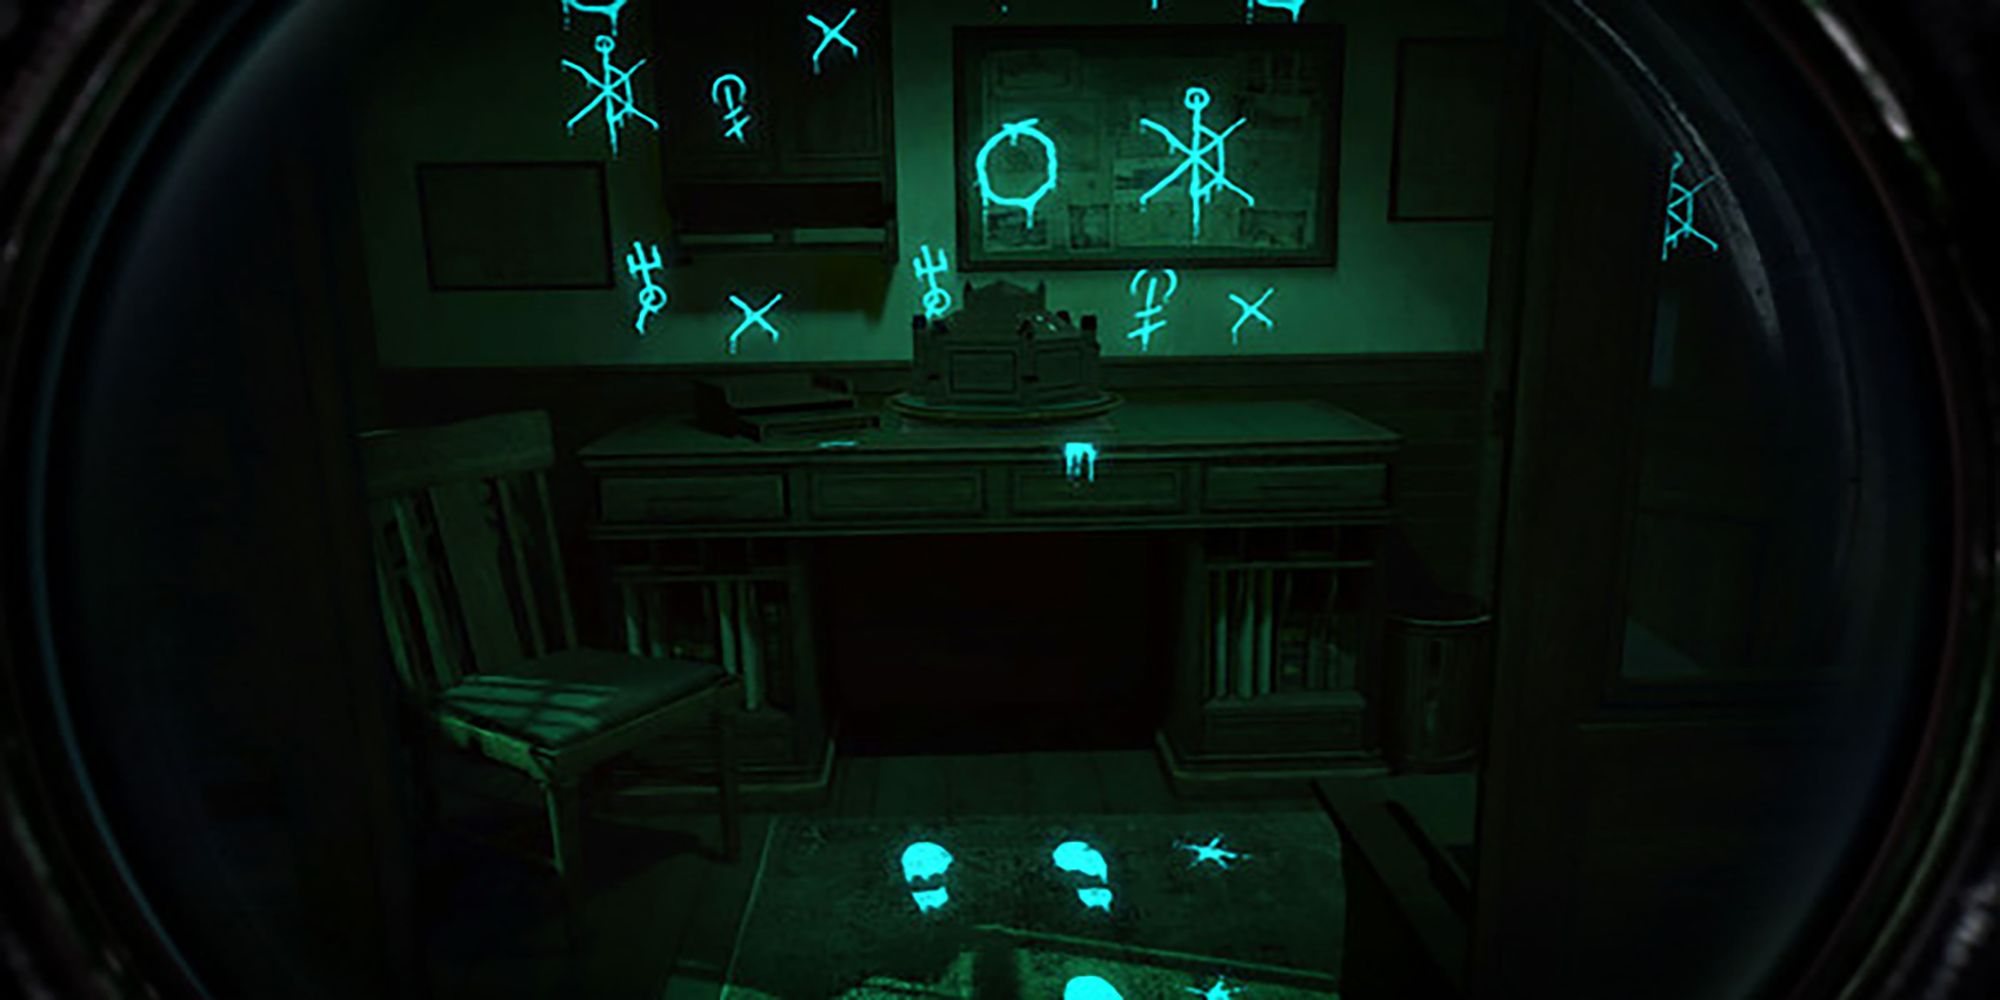 A detective uses an ancient artifact to uncover markings in an office in The Room VR: A Dark Matter.